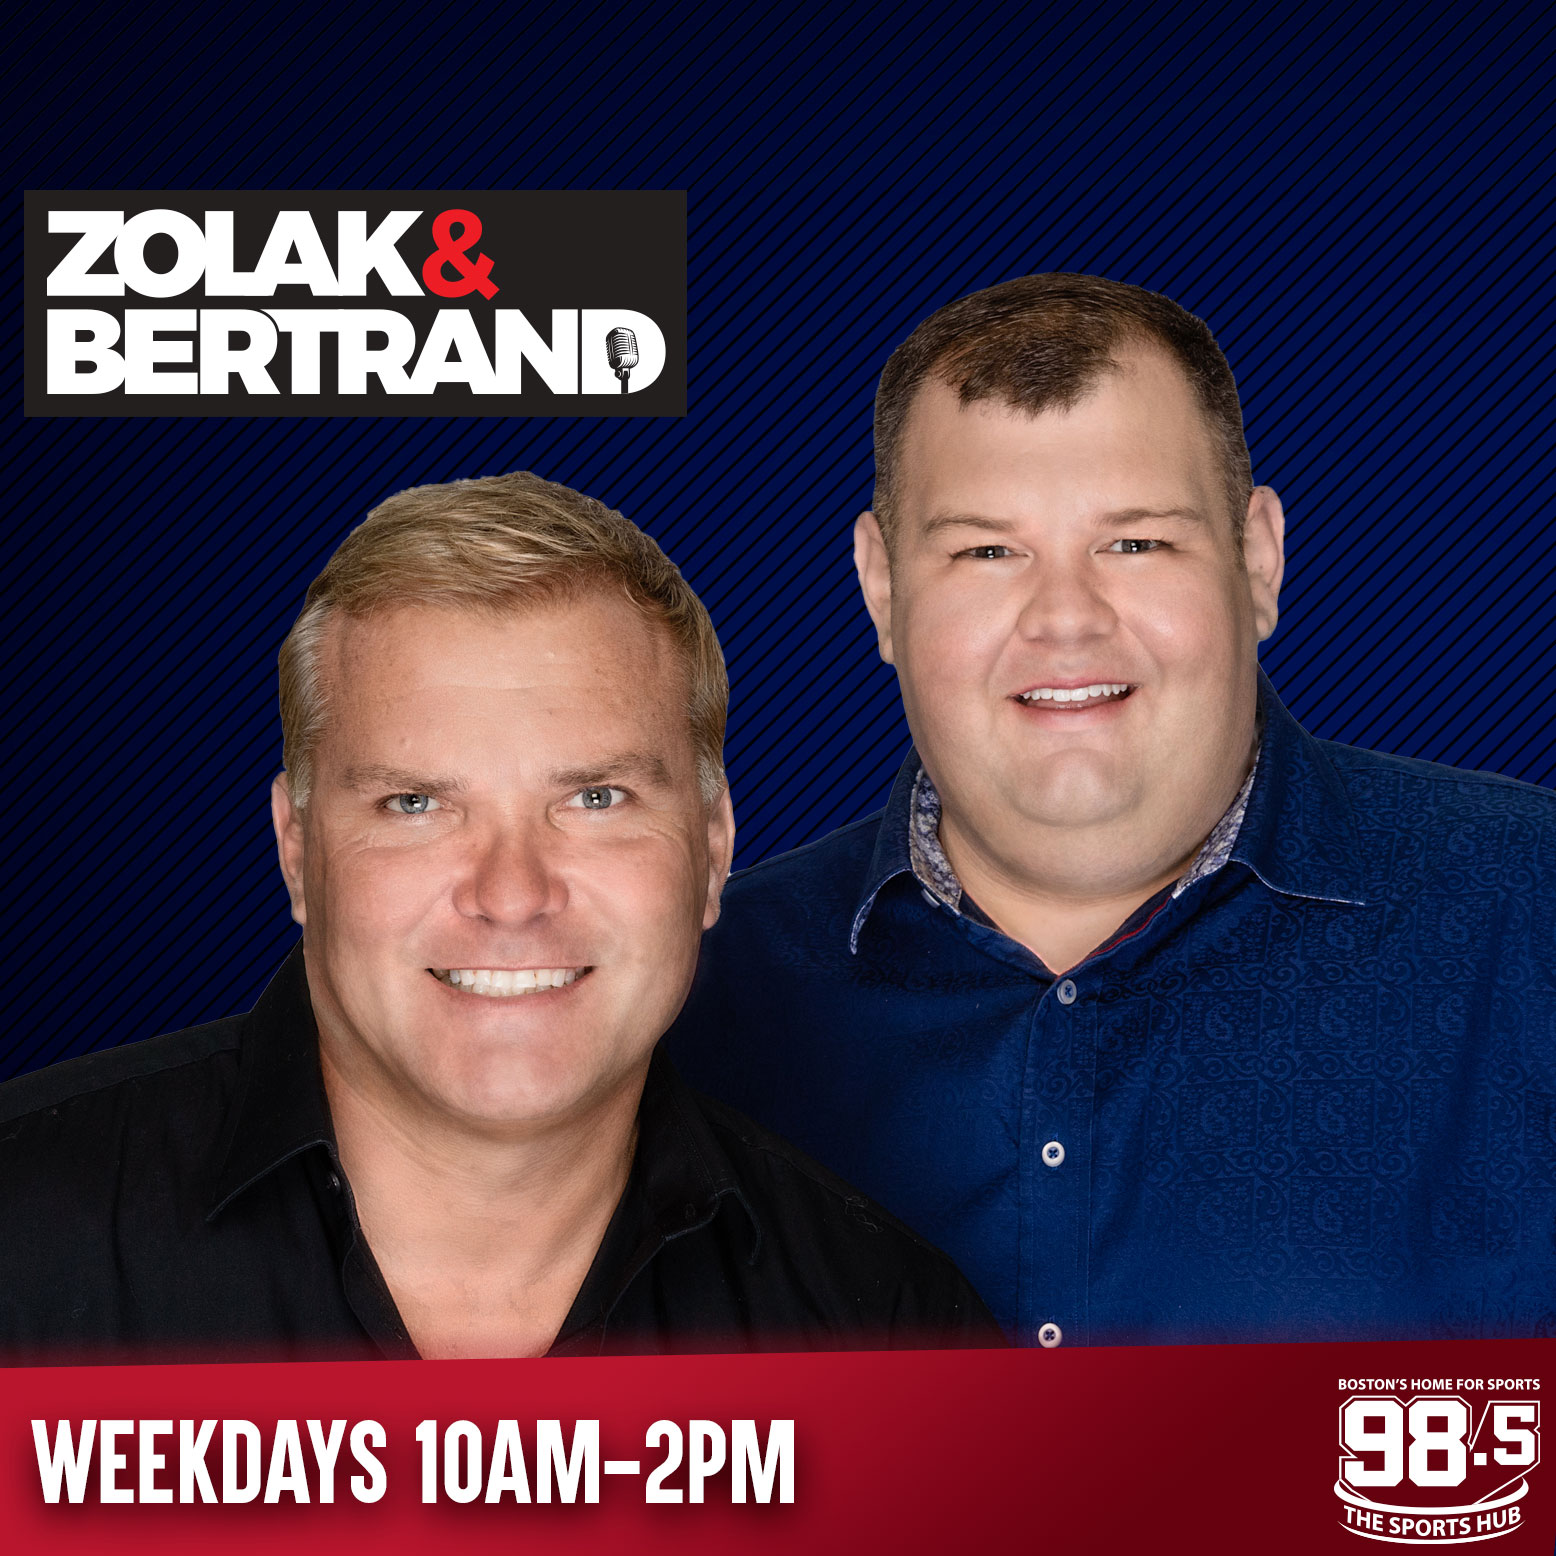 Zolak & Bertrand: Could the 49ers bringing Belichick as a consultant?